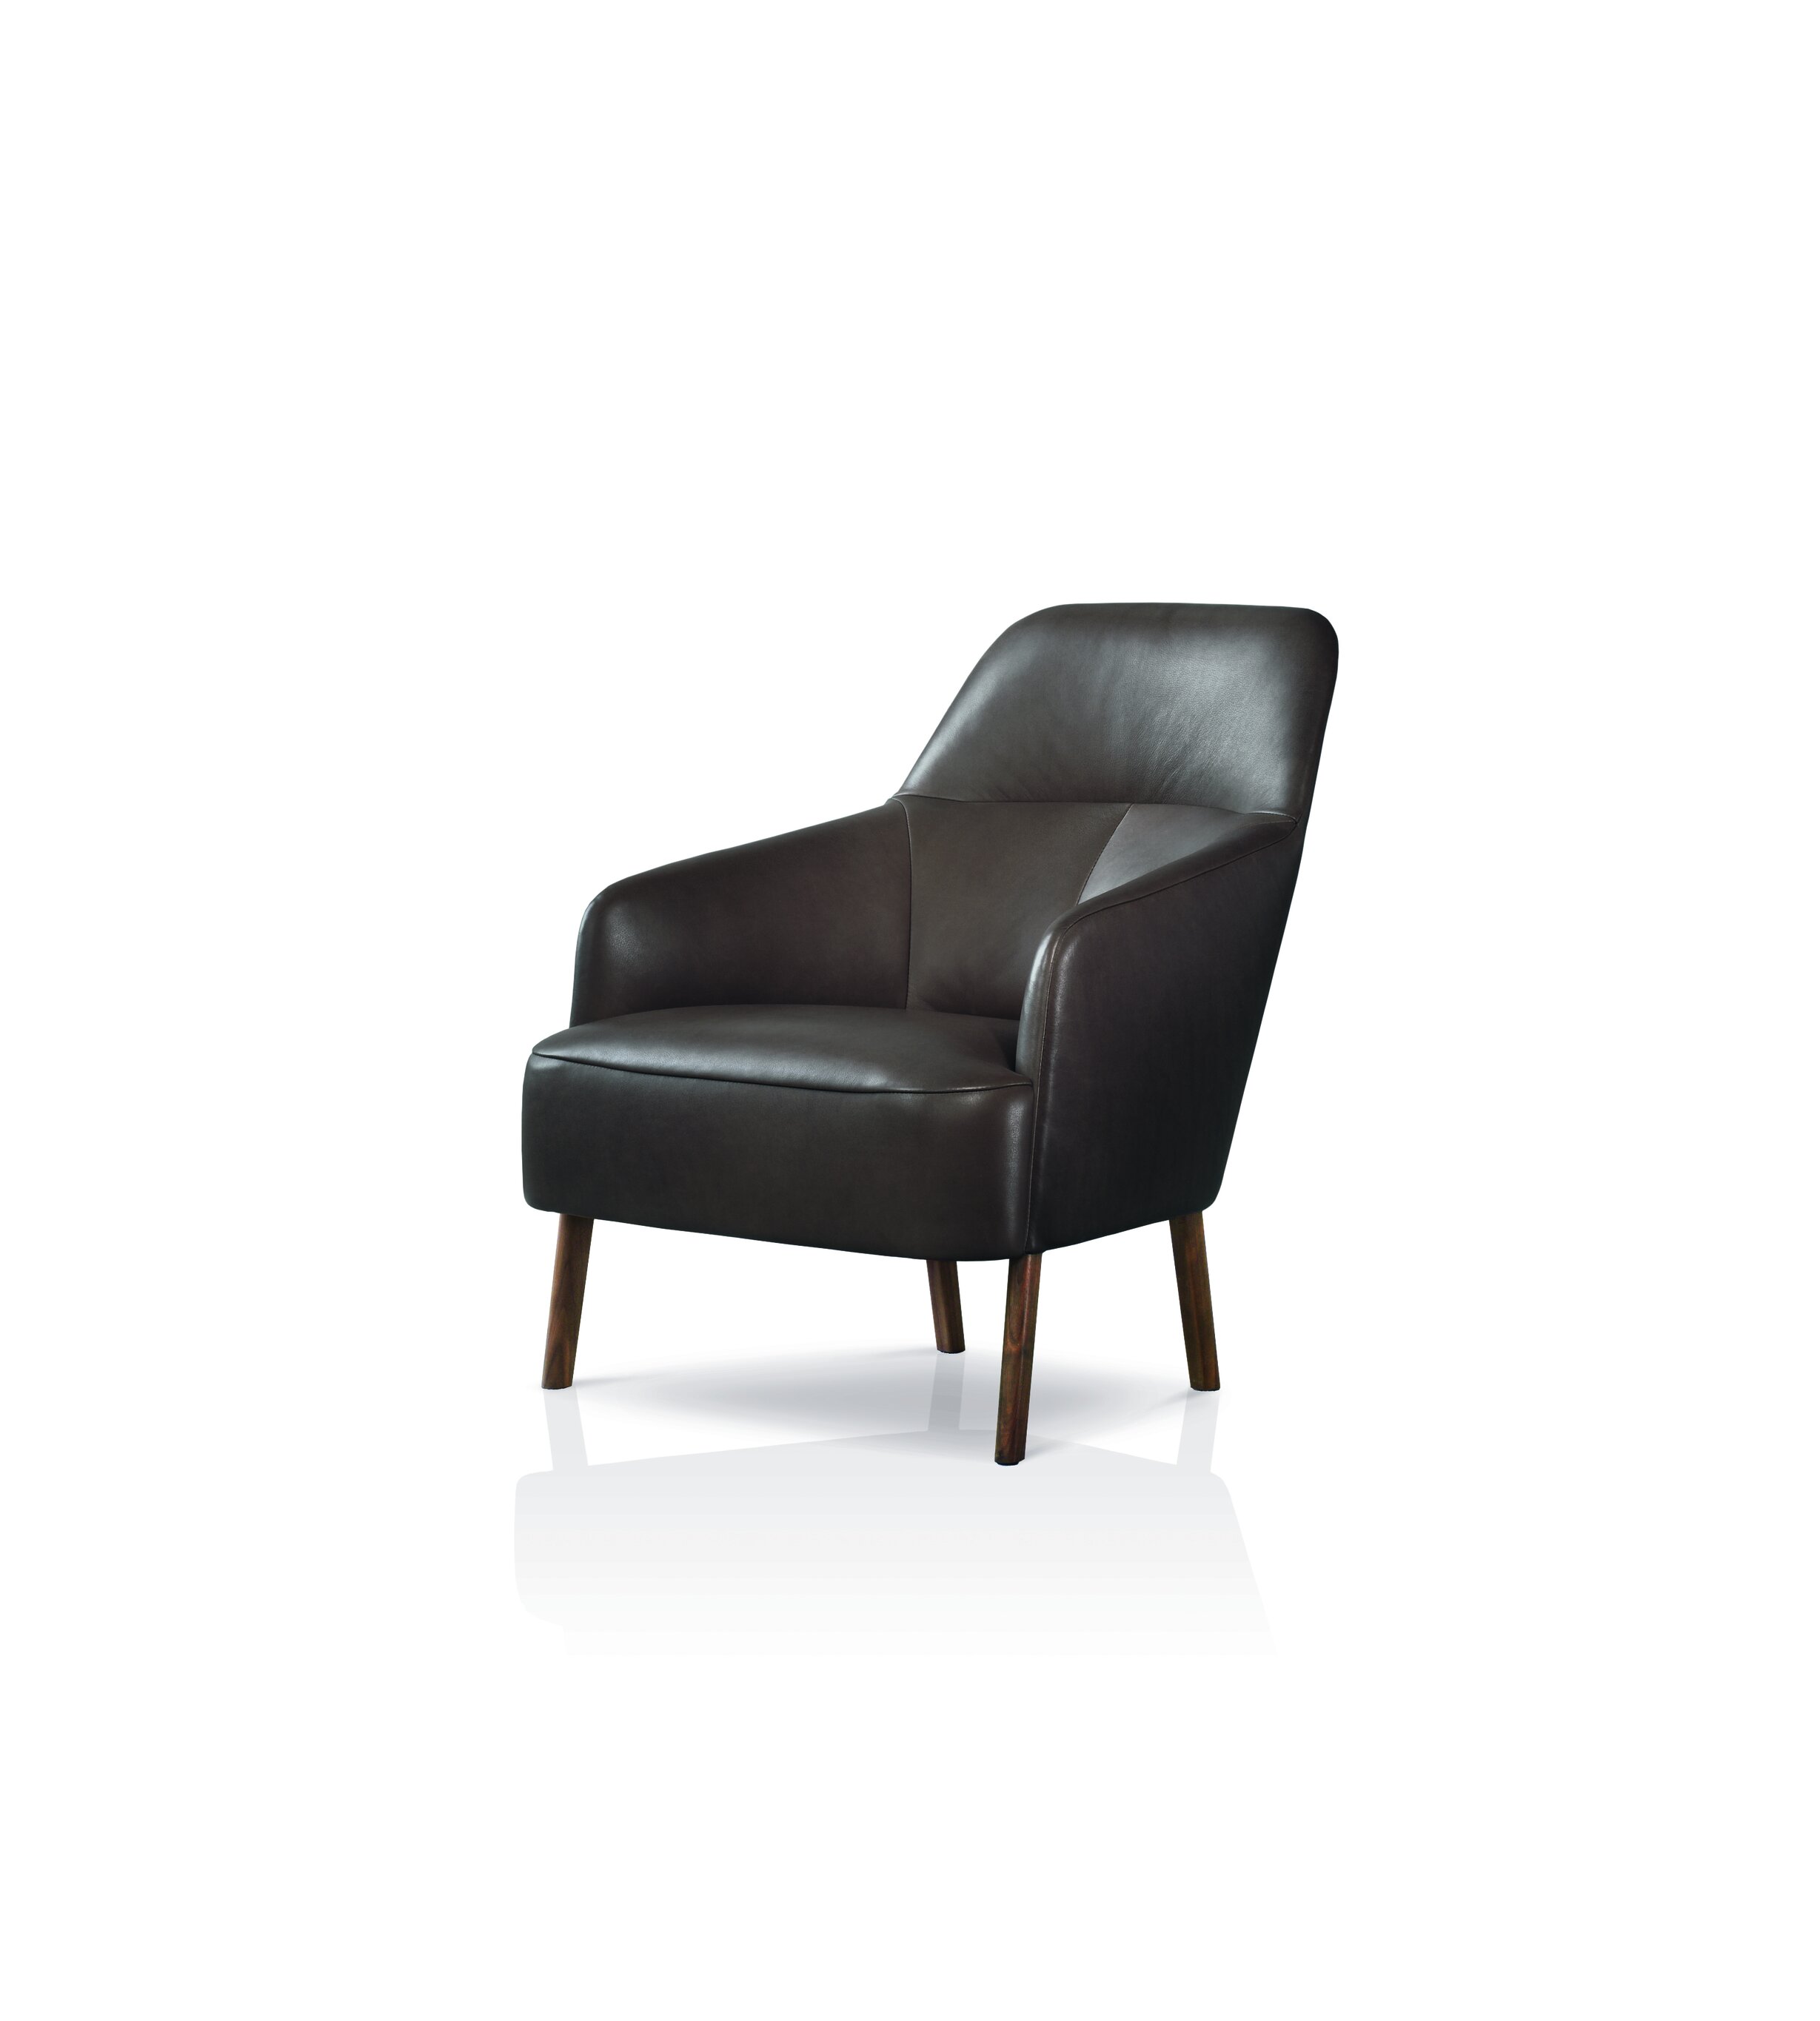 Mono armchair in brown Natural umbra leather